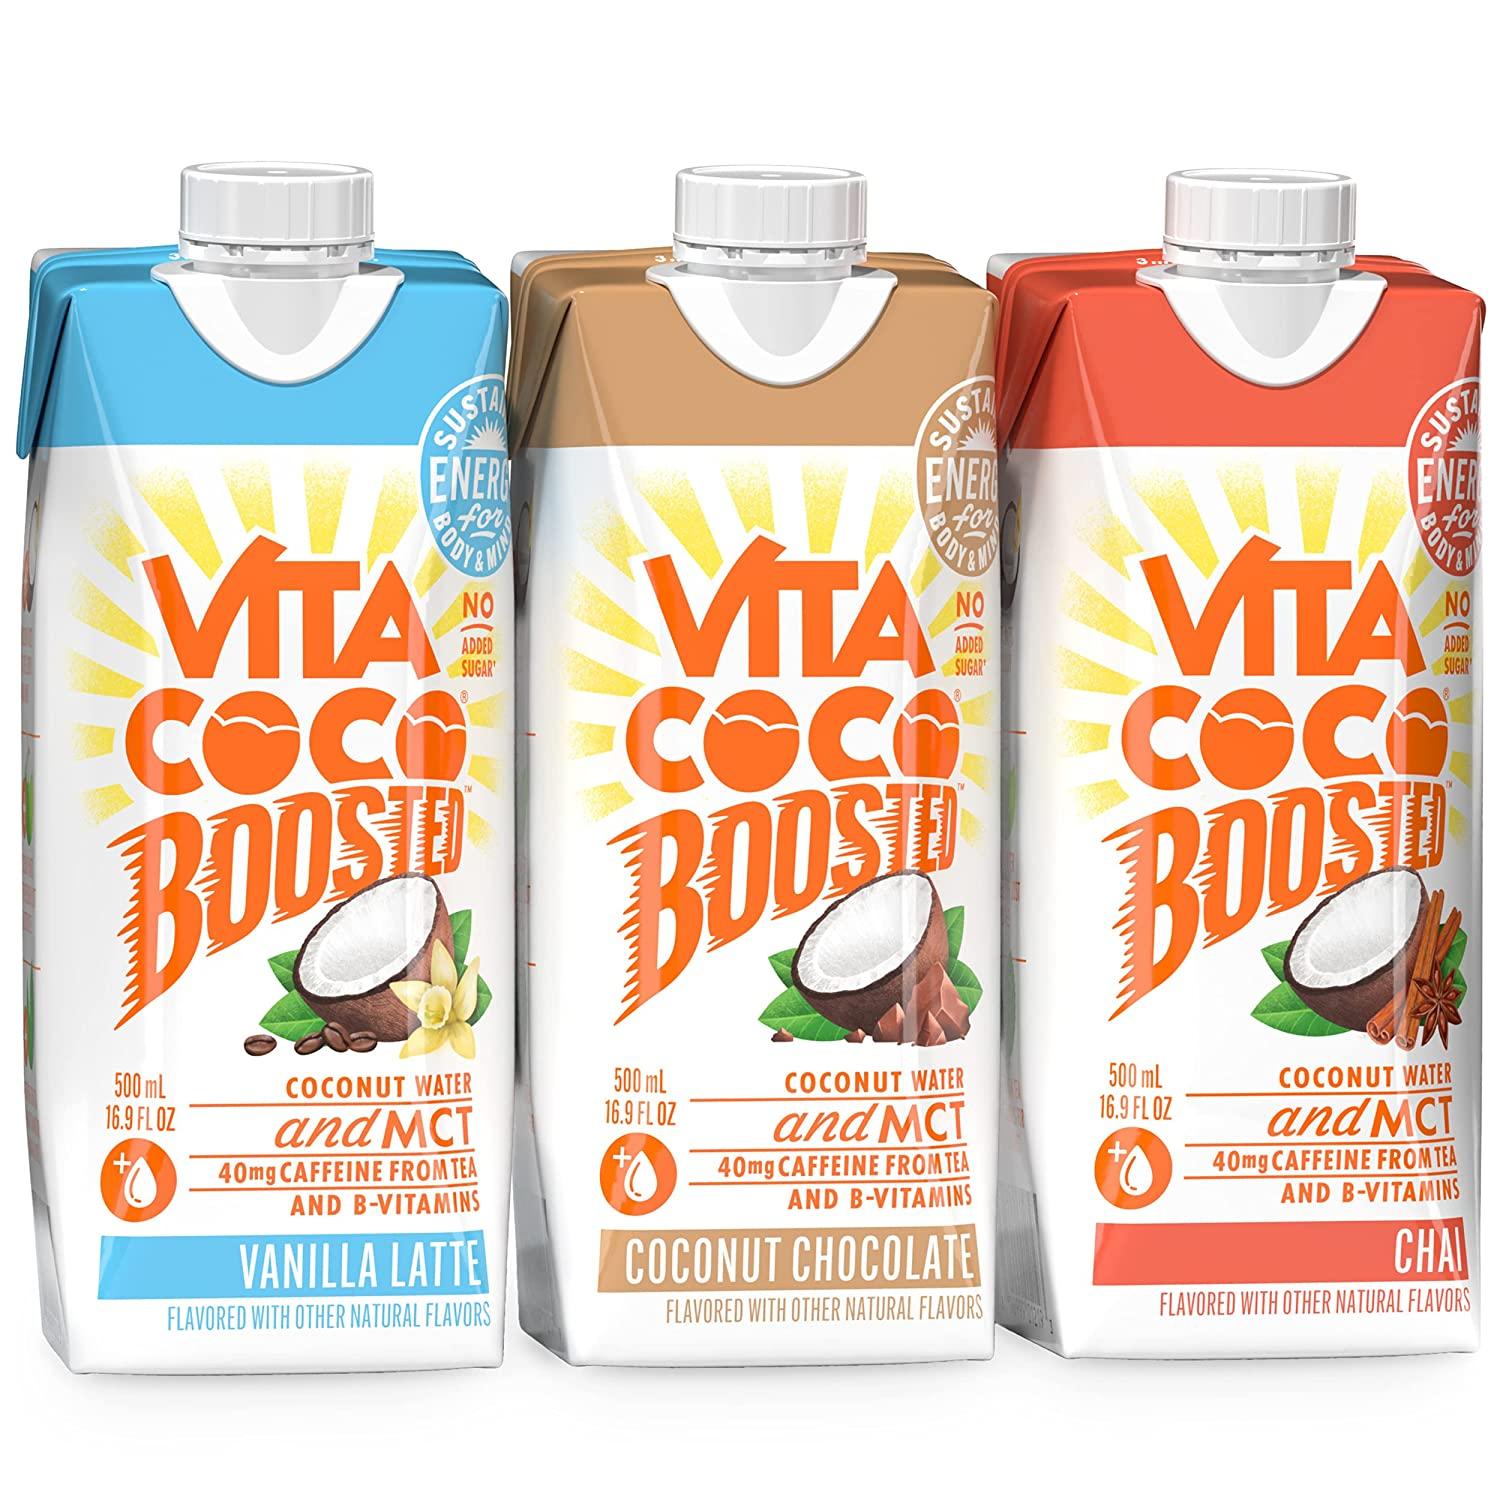 3 Vita Coco Boosted Coconut Water Sampler Pack for $4.49 Shipped